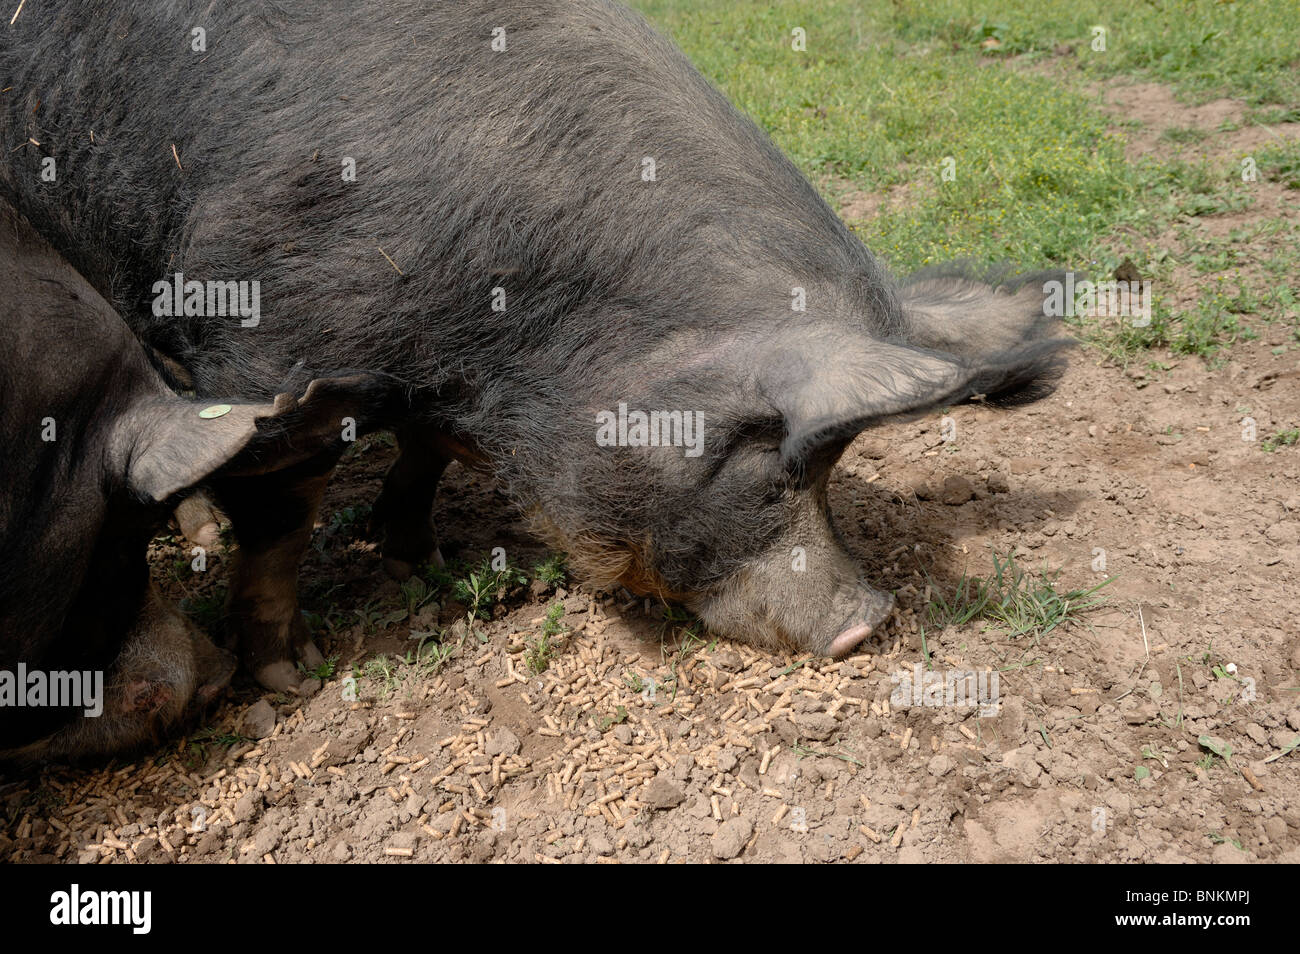 Berkshire sow feeding on nuts in domestic setting Stock Photo